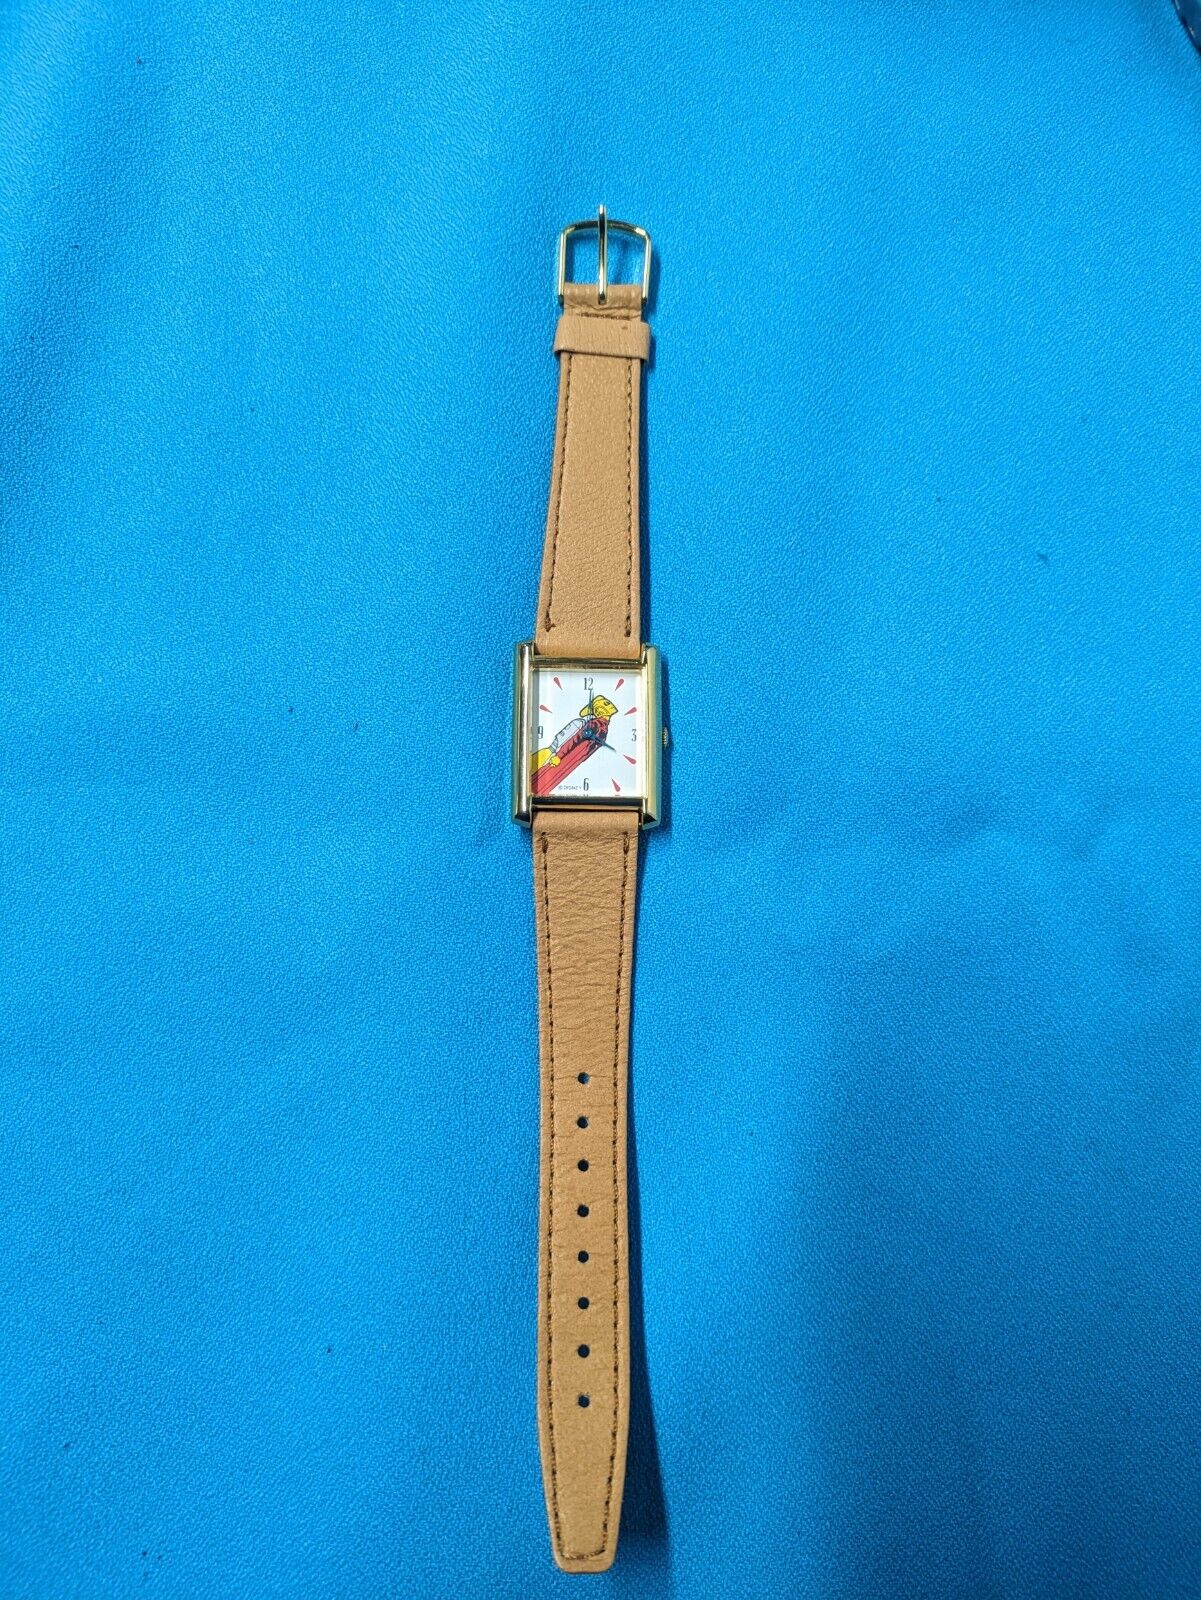 Vntg Disney Rocketeer Watch Limited Edition Tan Band Mail Away 1991